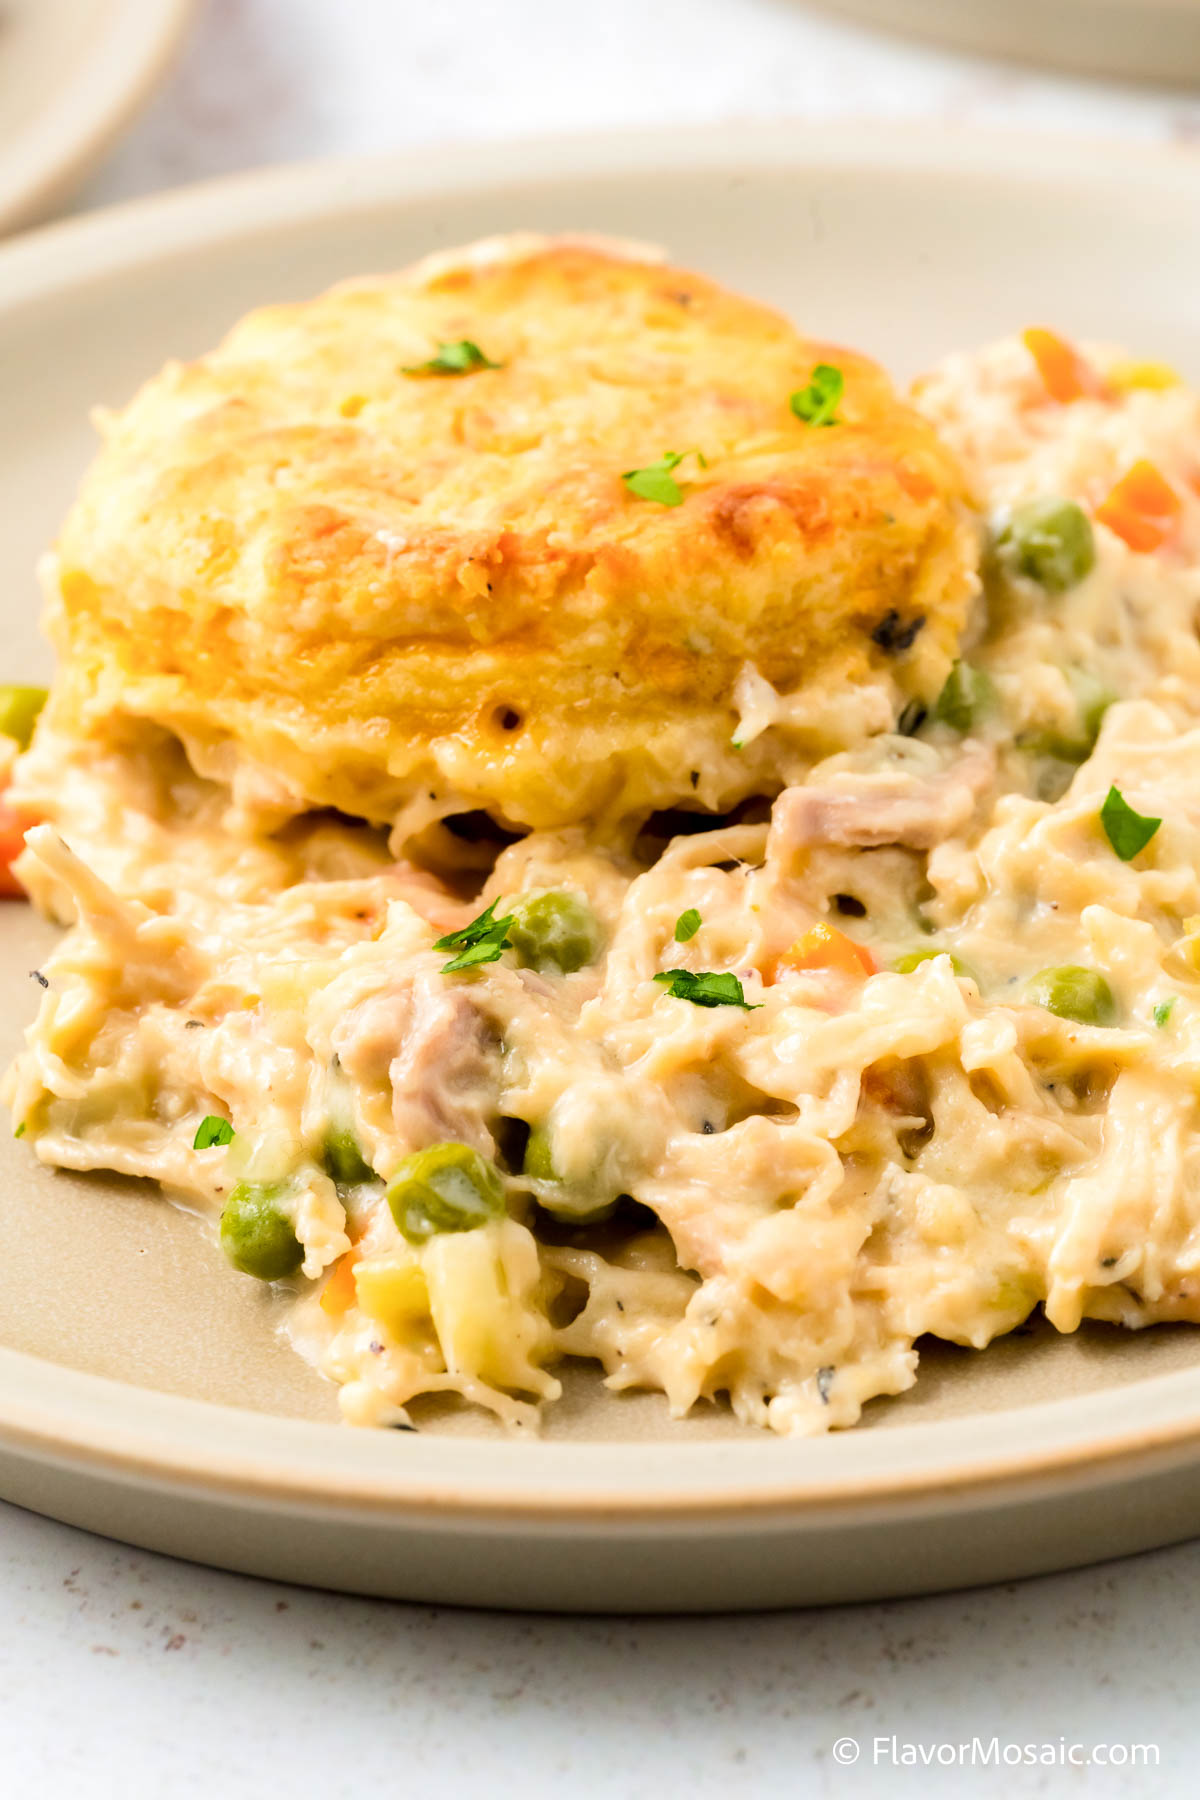 A serving of creamed chicken and biscuit casserole with the biscuit sitting on top of the creamed chicken filling on a white plate.